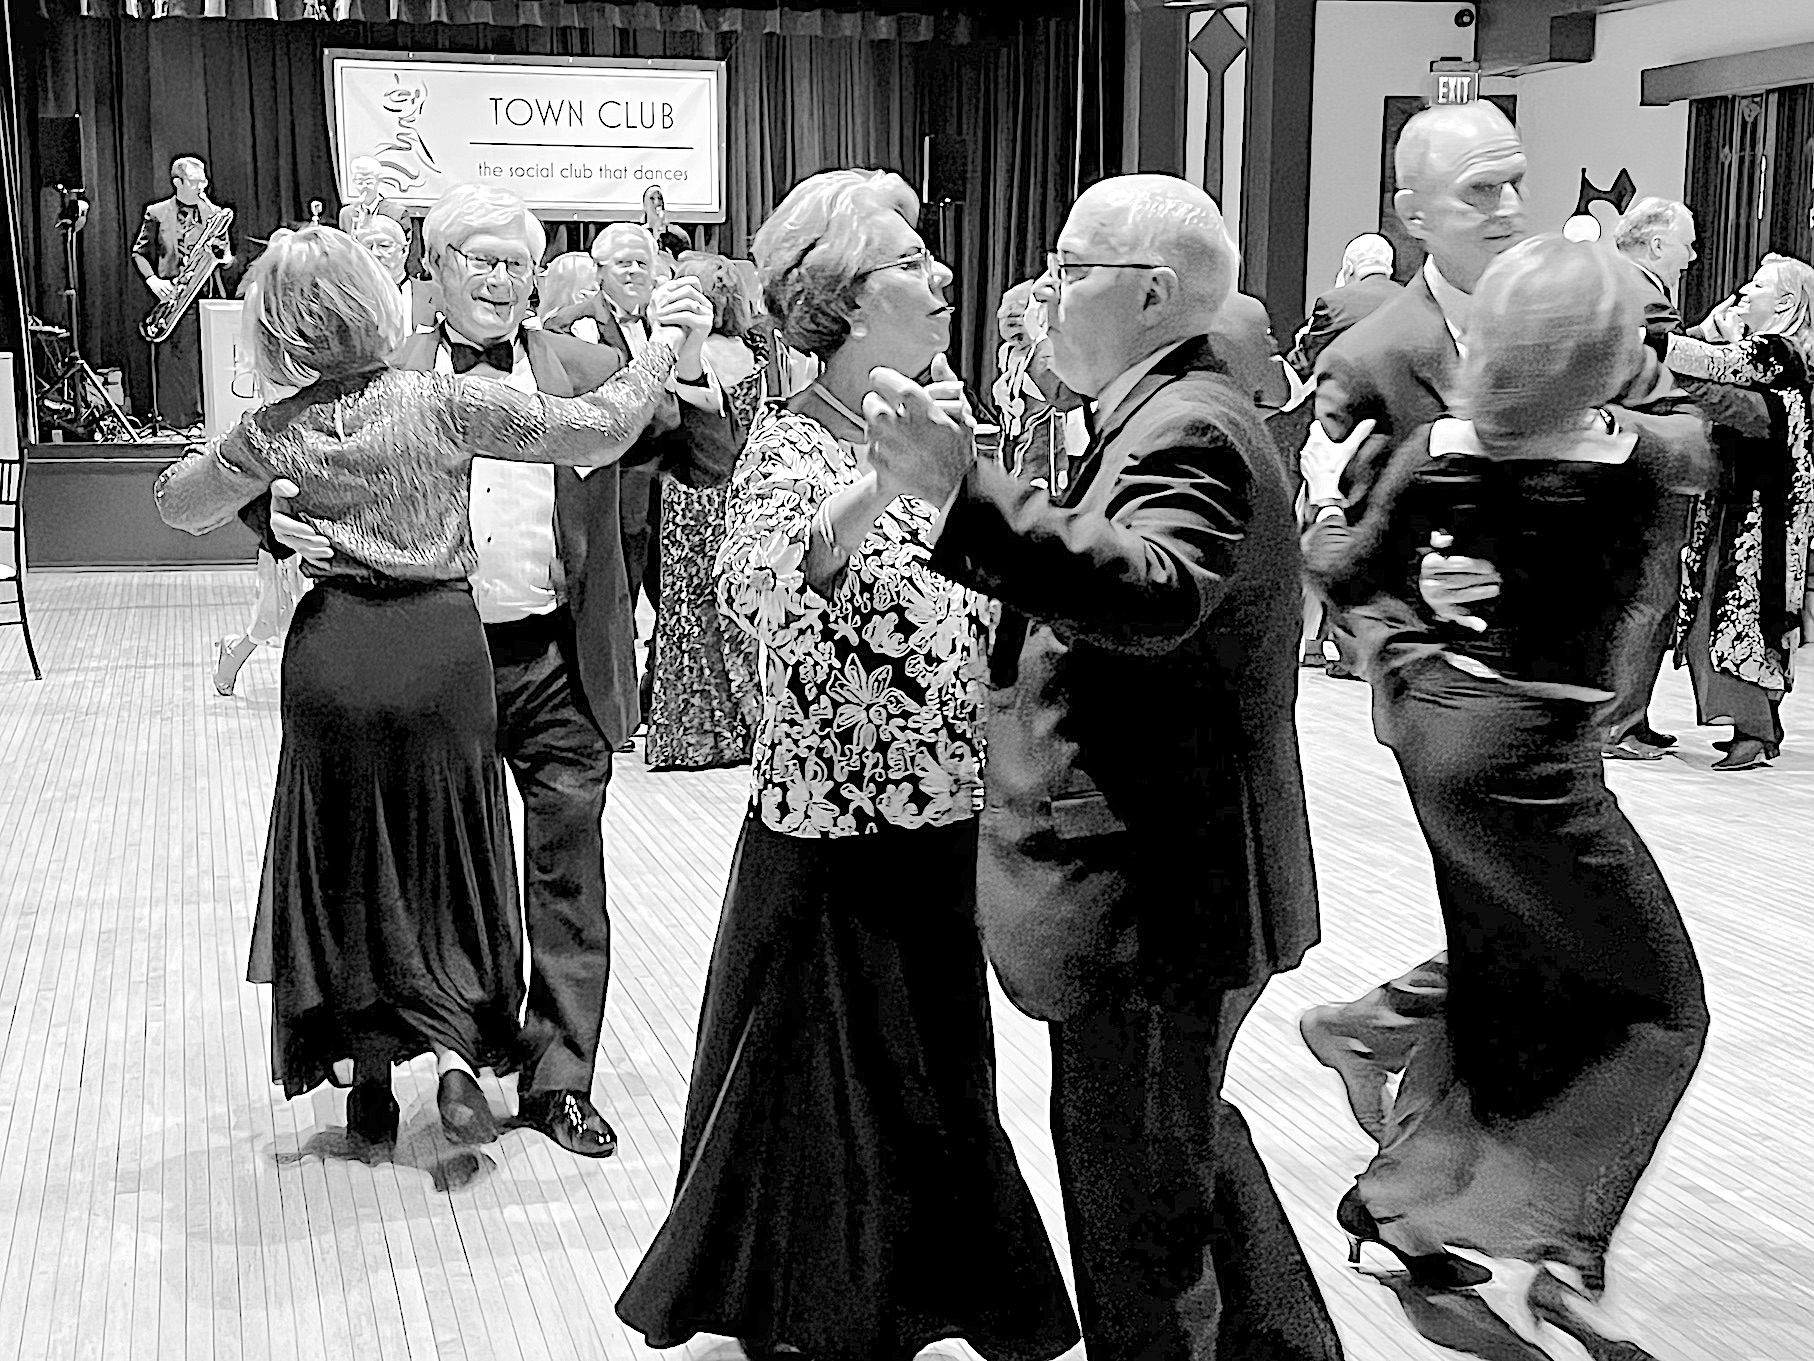 Town Club continue to dancing soon after all these many years